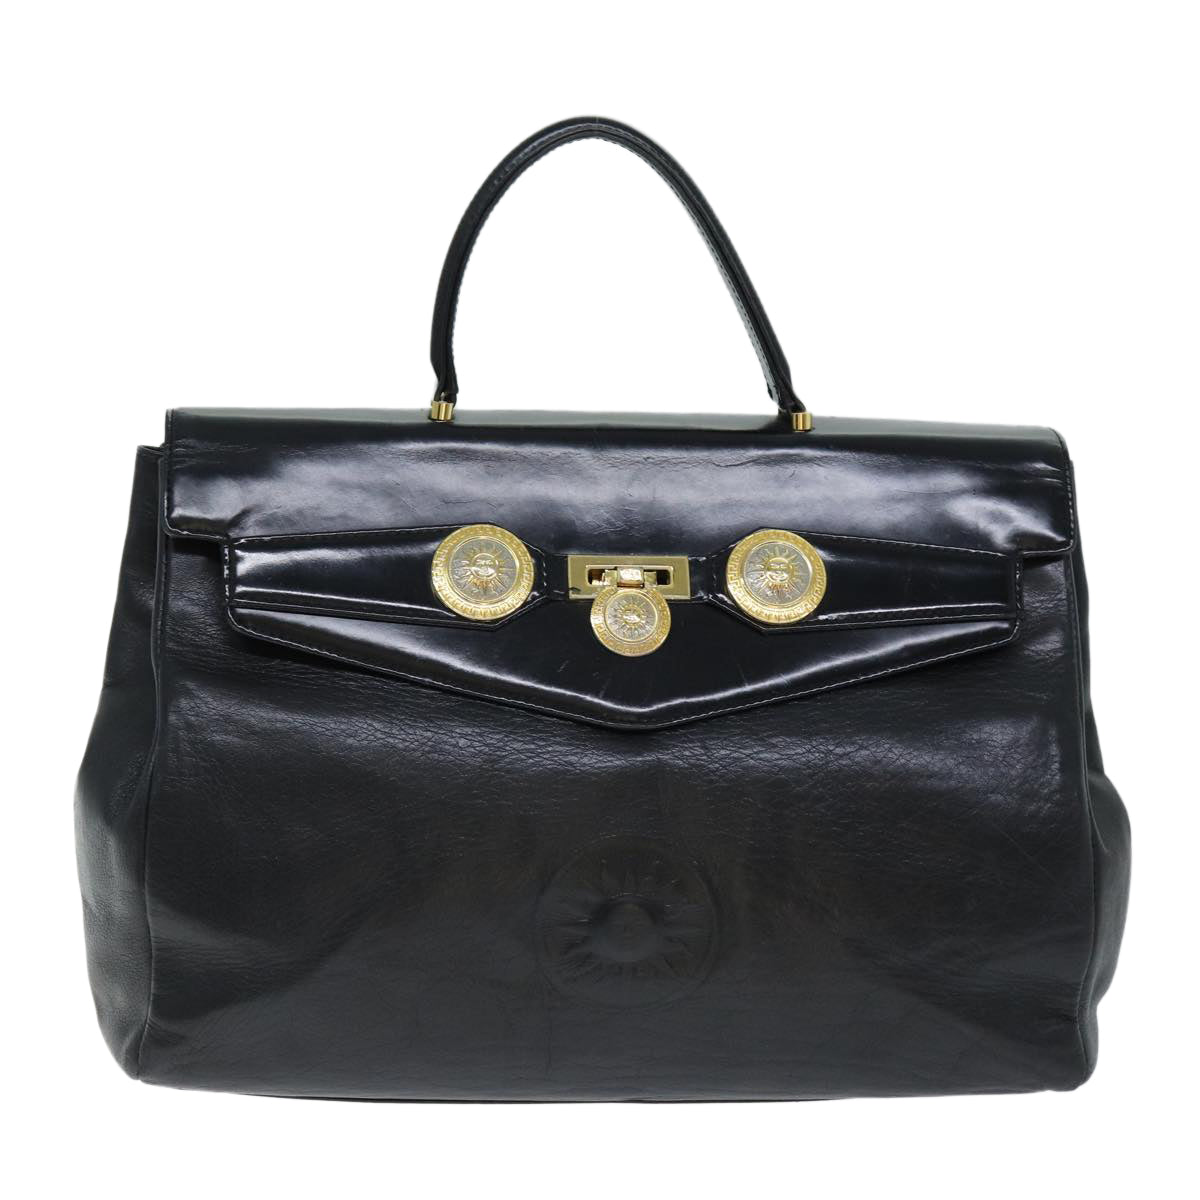 VERSACE Hand Bag Leather Black Auth yk12599 - 0